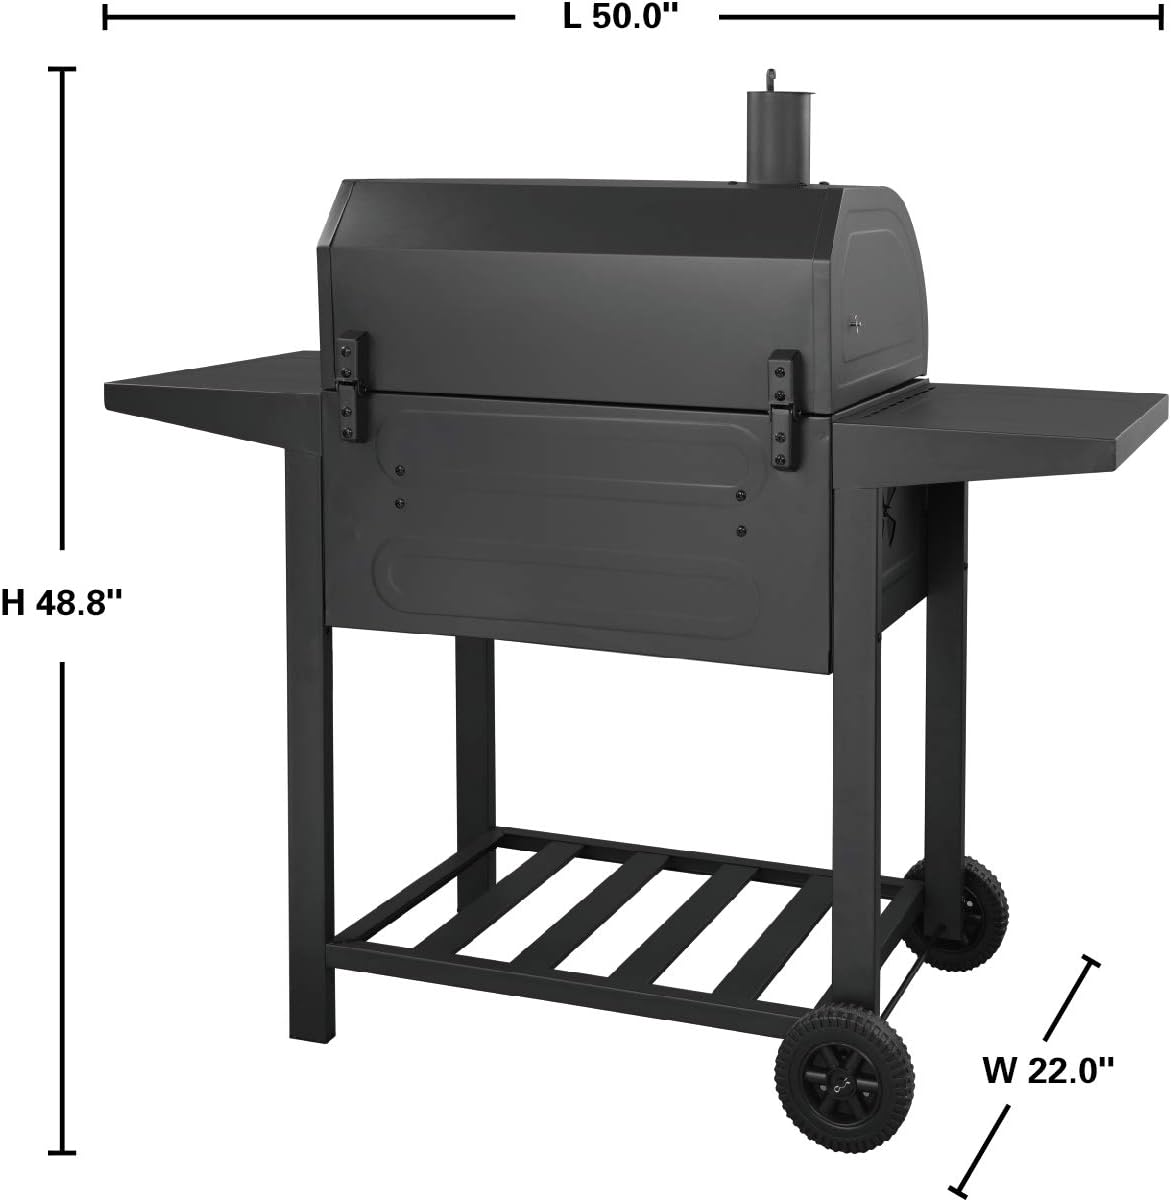 Royal Gourmet CD1824AC 24 Inch Charcoal Grill BBQ Outdoor Picnic, Patio Backyard Cooking, with Cover, Black